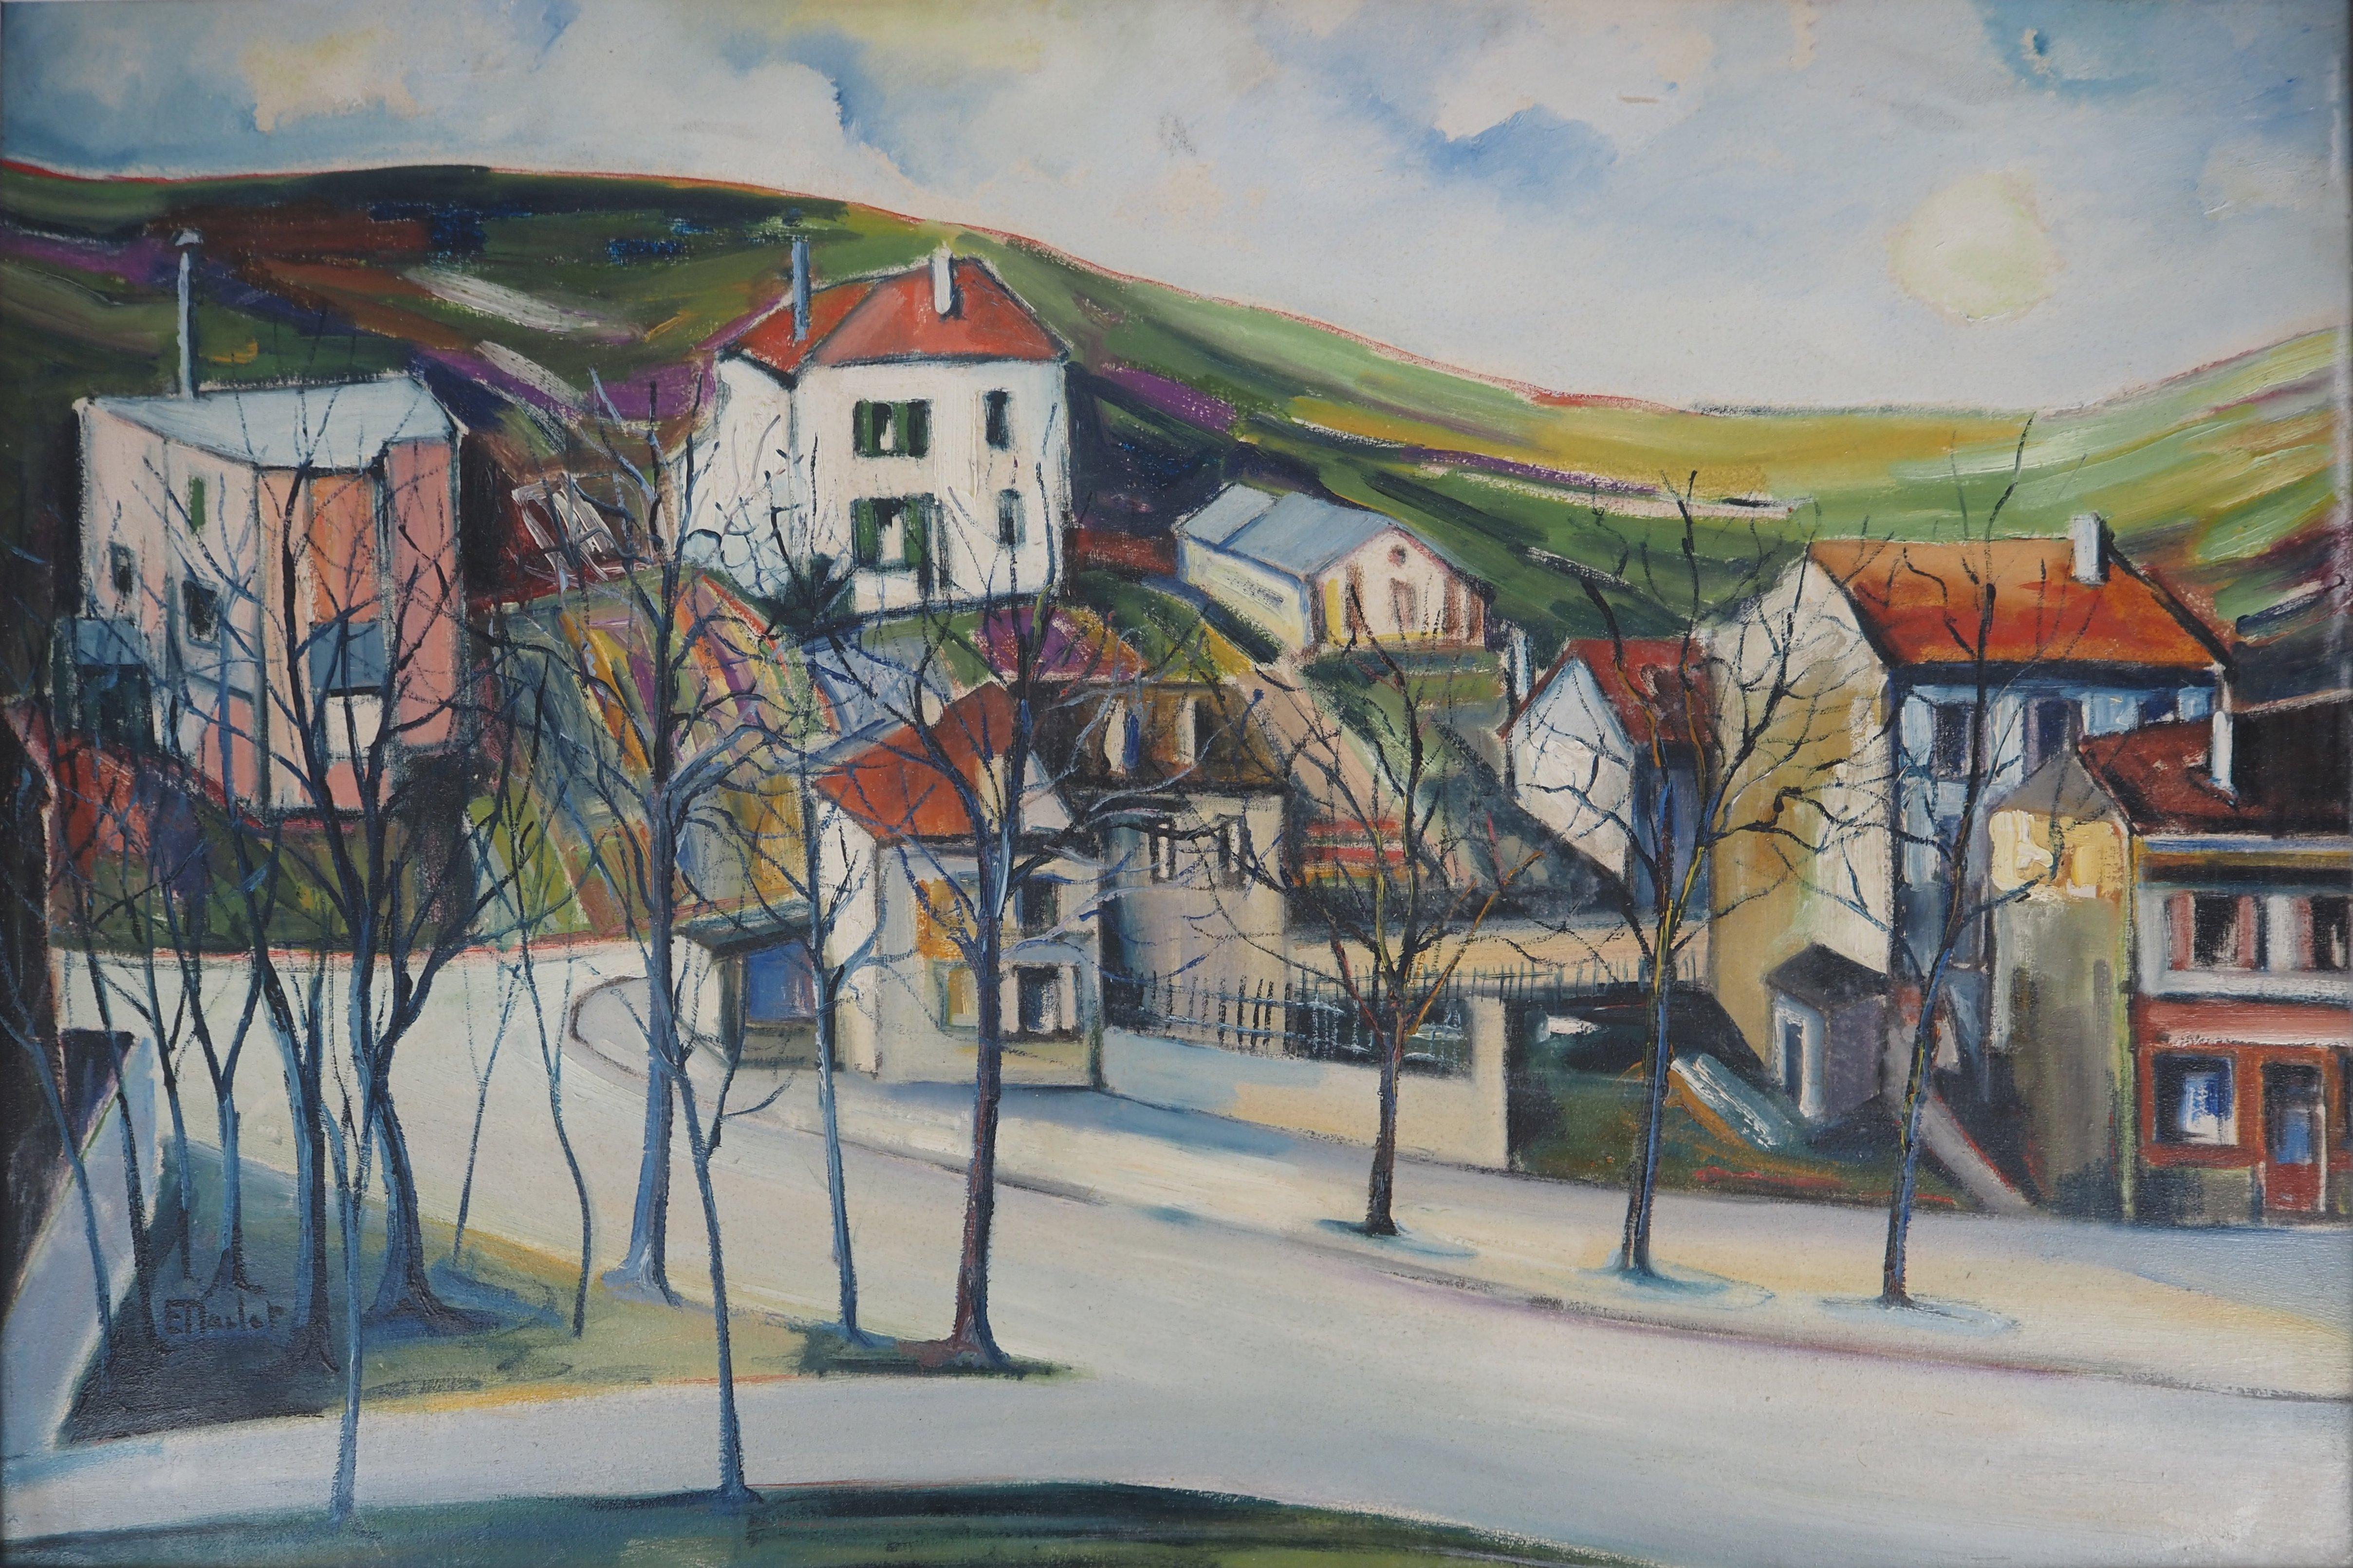 Elisée MACLET (1881-1962)
Normandy : Small Traditional Village, c. 1920

Original oil on canvas
Signed bottom right
On canvas 54 x 81 cm at view (c. 21 x 32 in) 
Presented in a golden frame 72 x 99 cm (c. 29 x 39 in)

Very good condition, light